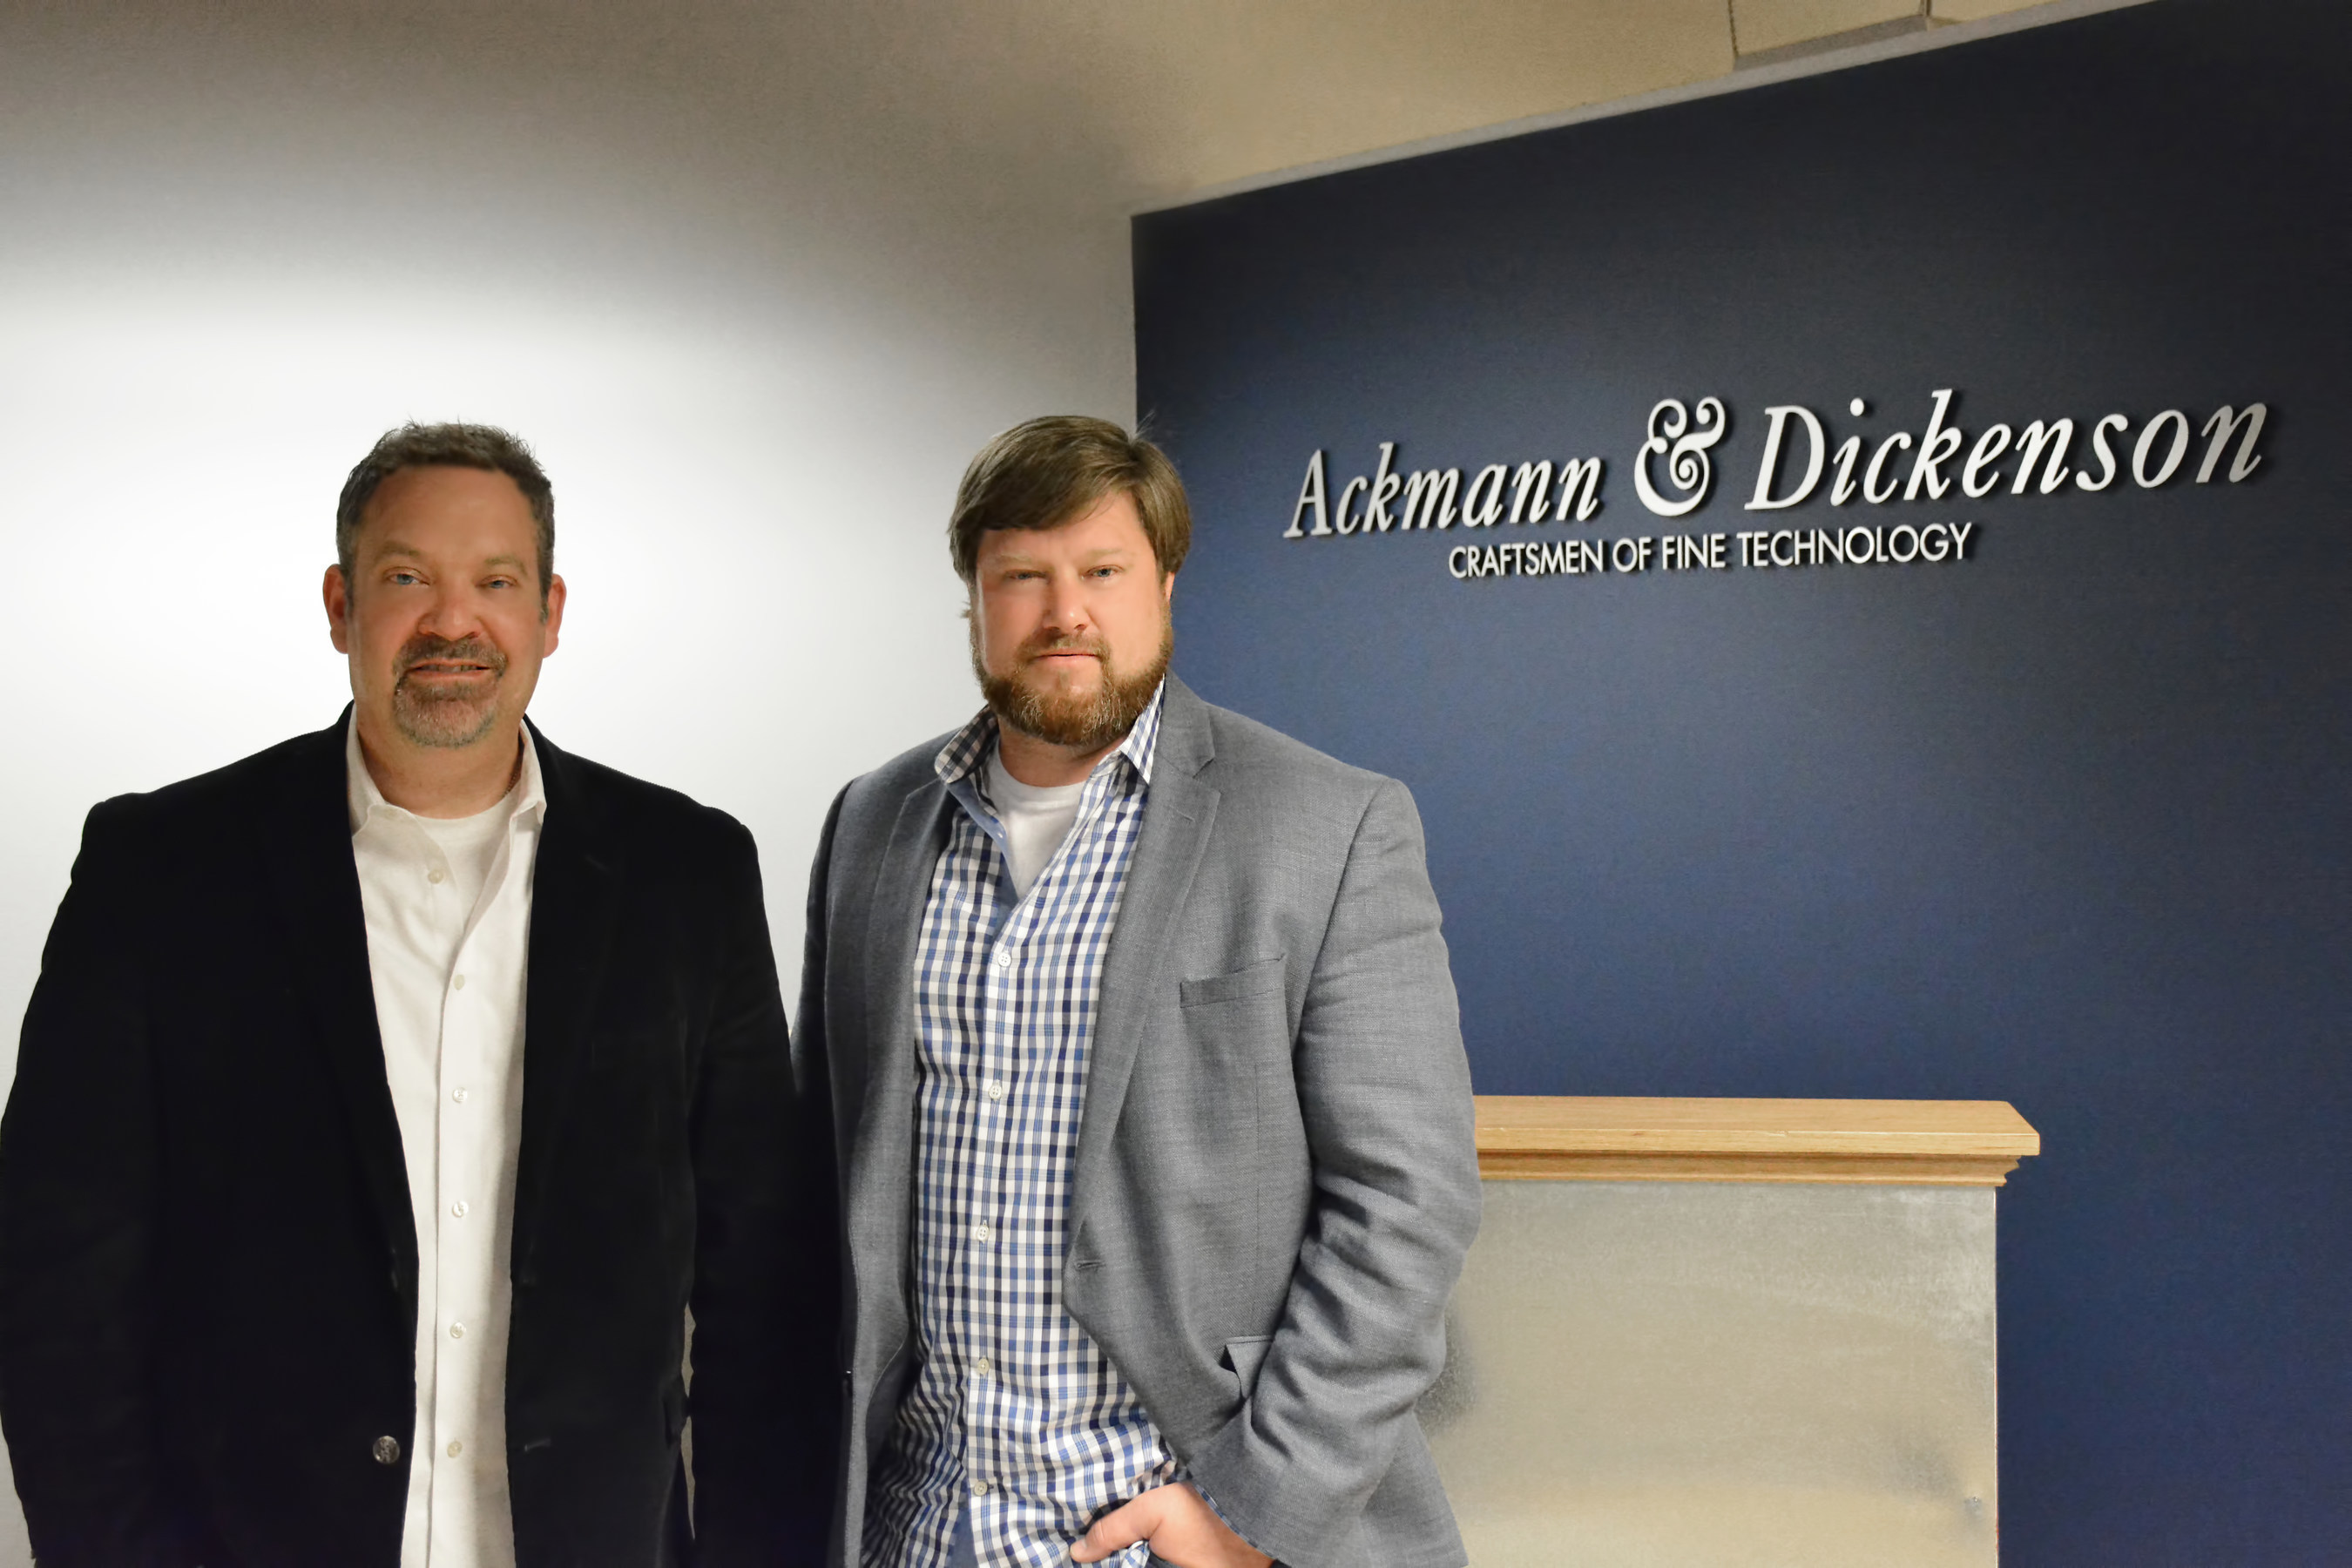 Mike Ackmann, left, and Andrew Dickenson, right.